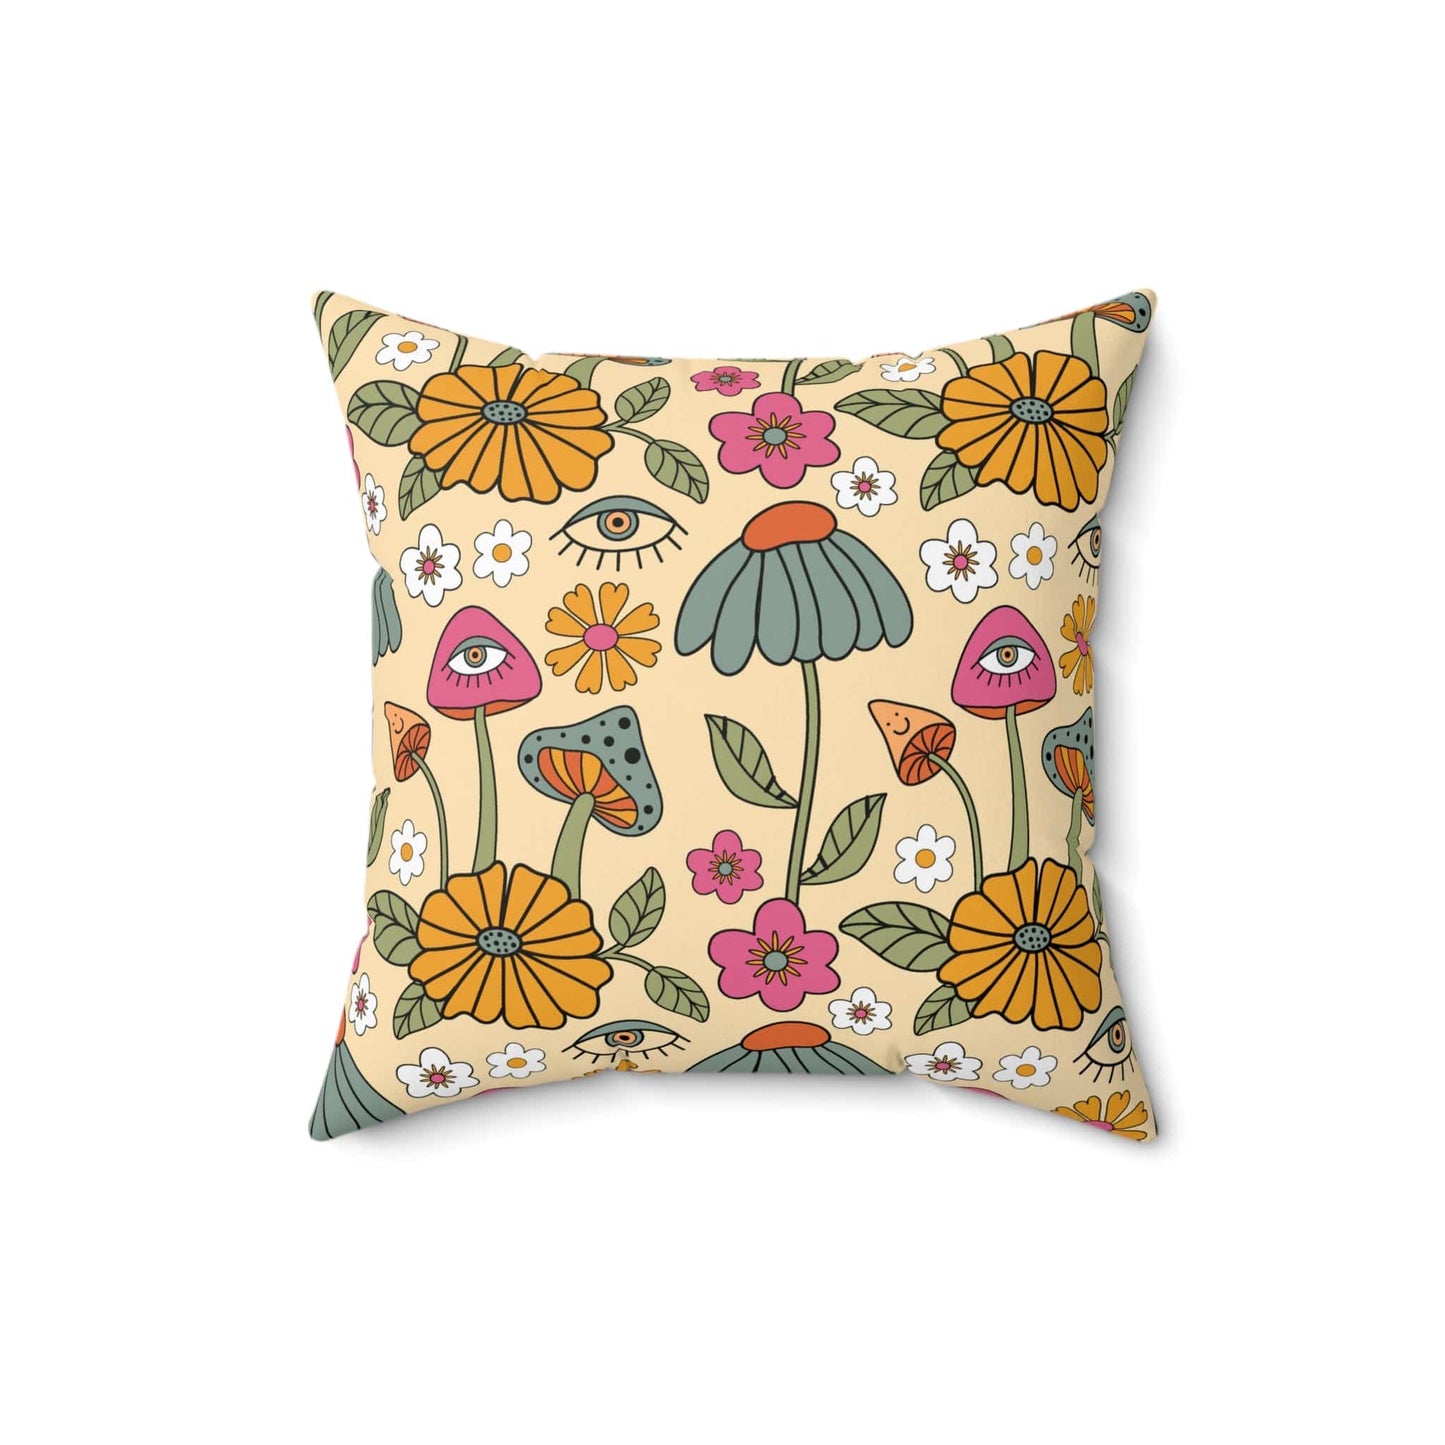 Kate McEnroe New York Hippie Mushroom Cottagecore Aesthetic Throw Pillow with Insert, Retro Floral 70s Psychedelic Accent Pillow Throw Pillows 16" × 16" 19932877051404818481